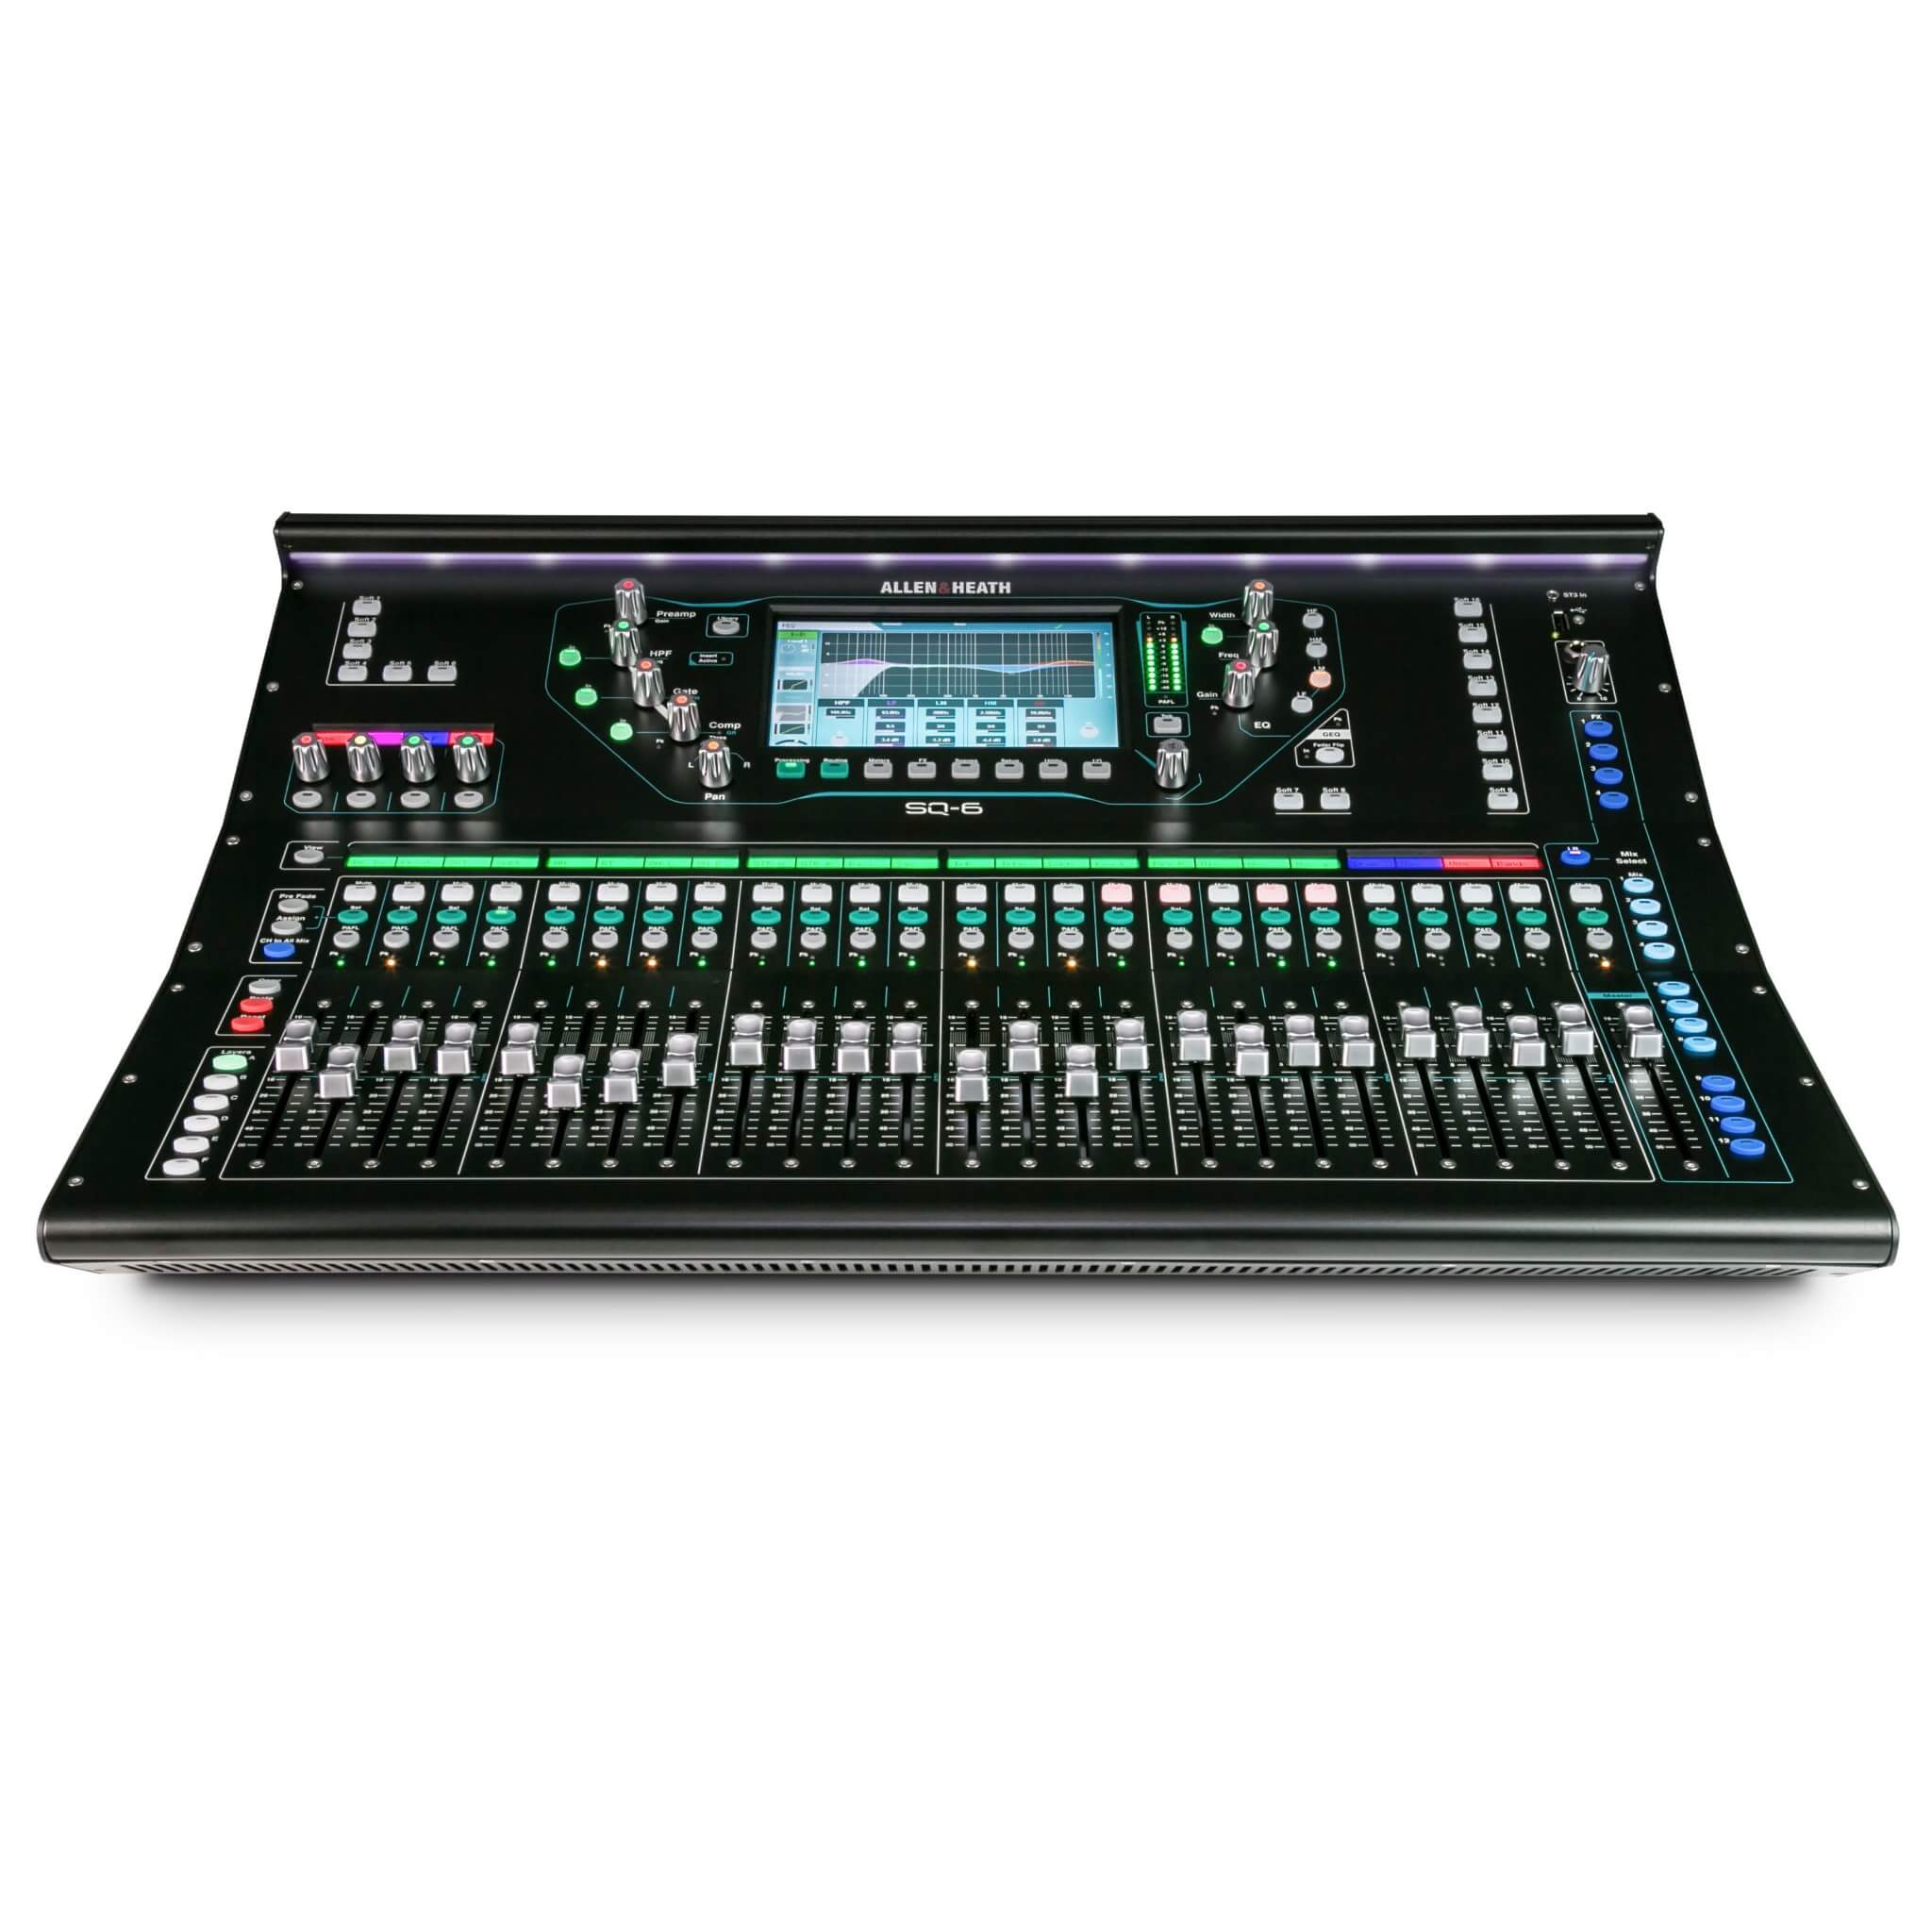 Allen & Heath SQ-6 48-channel Digital Mixer with 25 faders, front